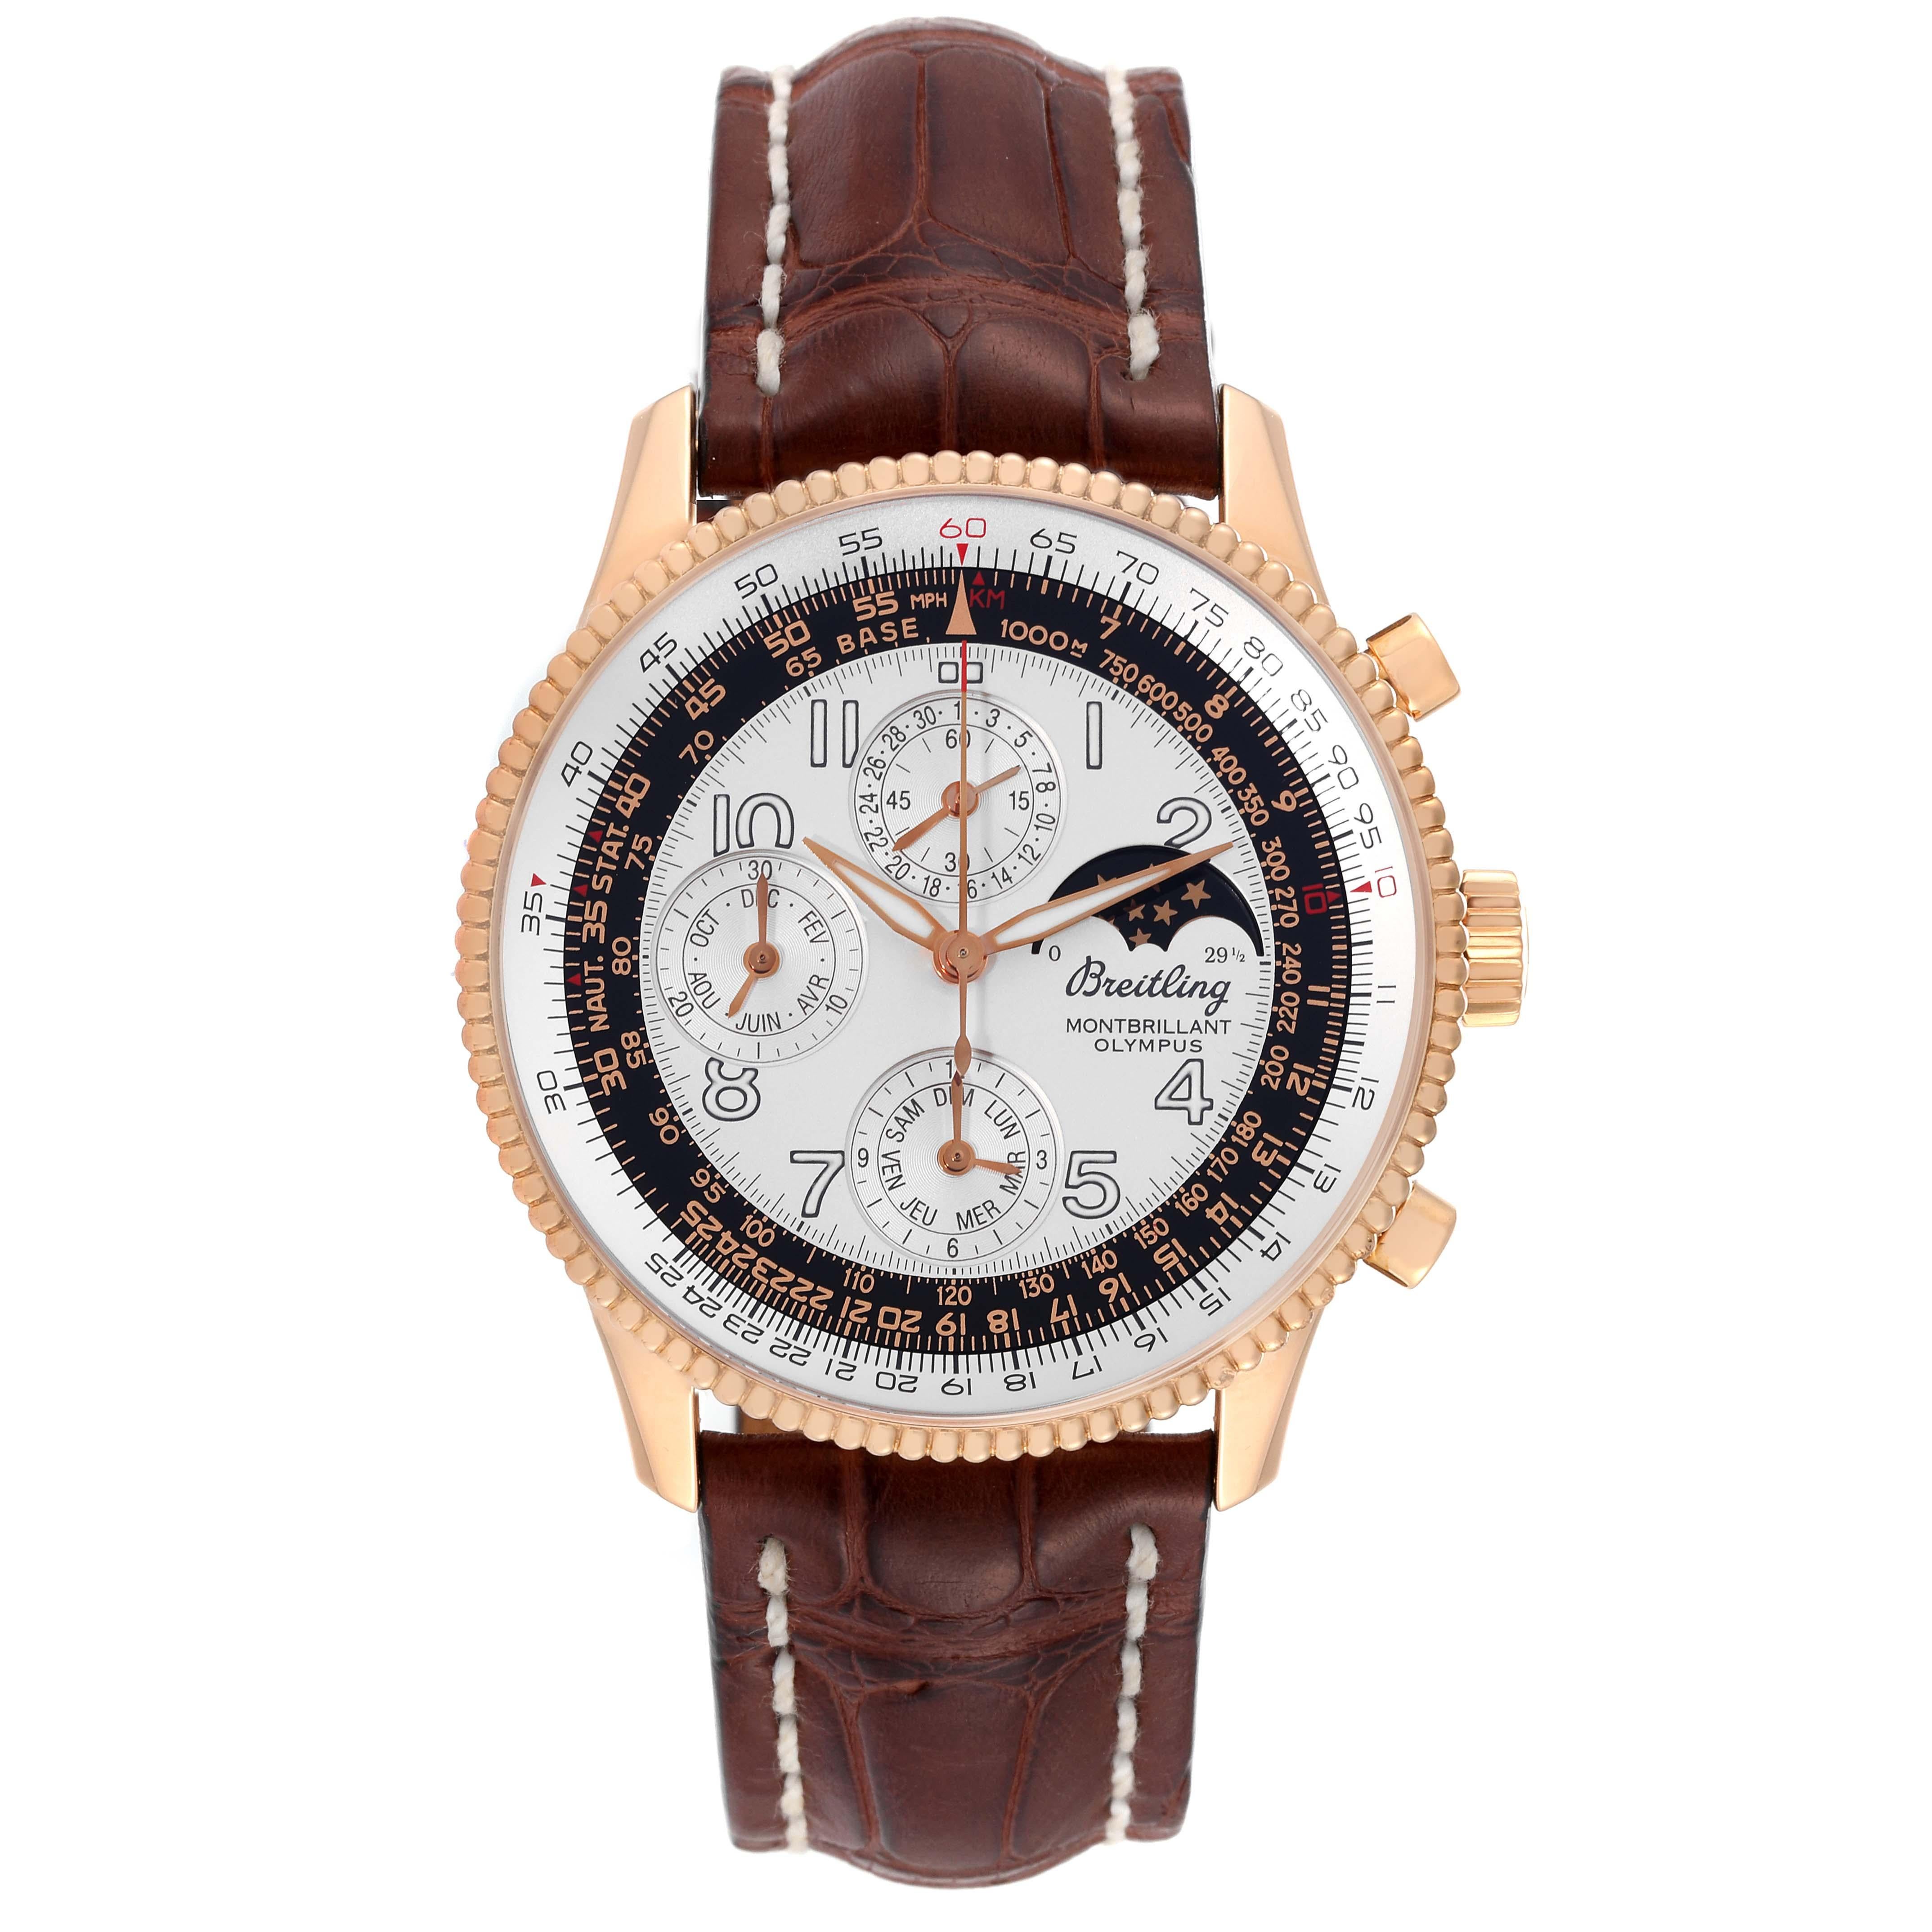 Breitling Montbrillant Olympus Rose Gold Mens Watch H19350 Box Papers. Self-winding automatic officially certified chronometer movement. Chronograph function and moonphase function. 18K rose gold case 42.1 mm in diameter.  Case back engraved with an